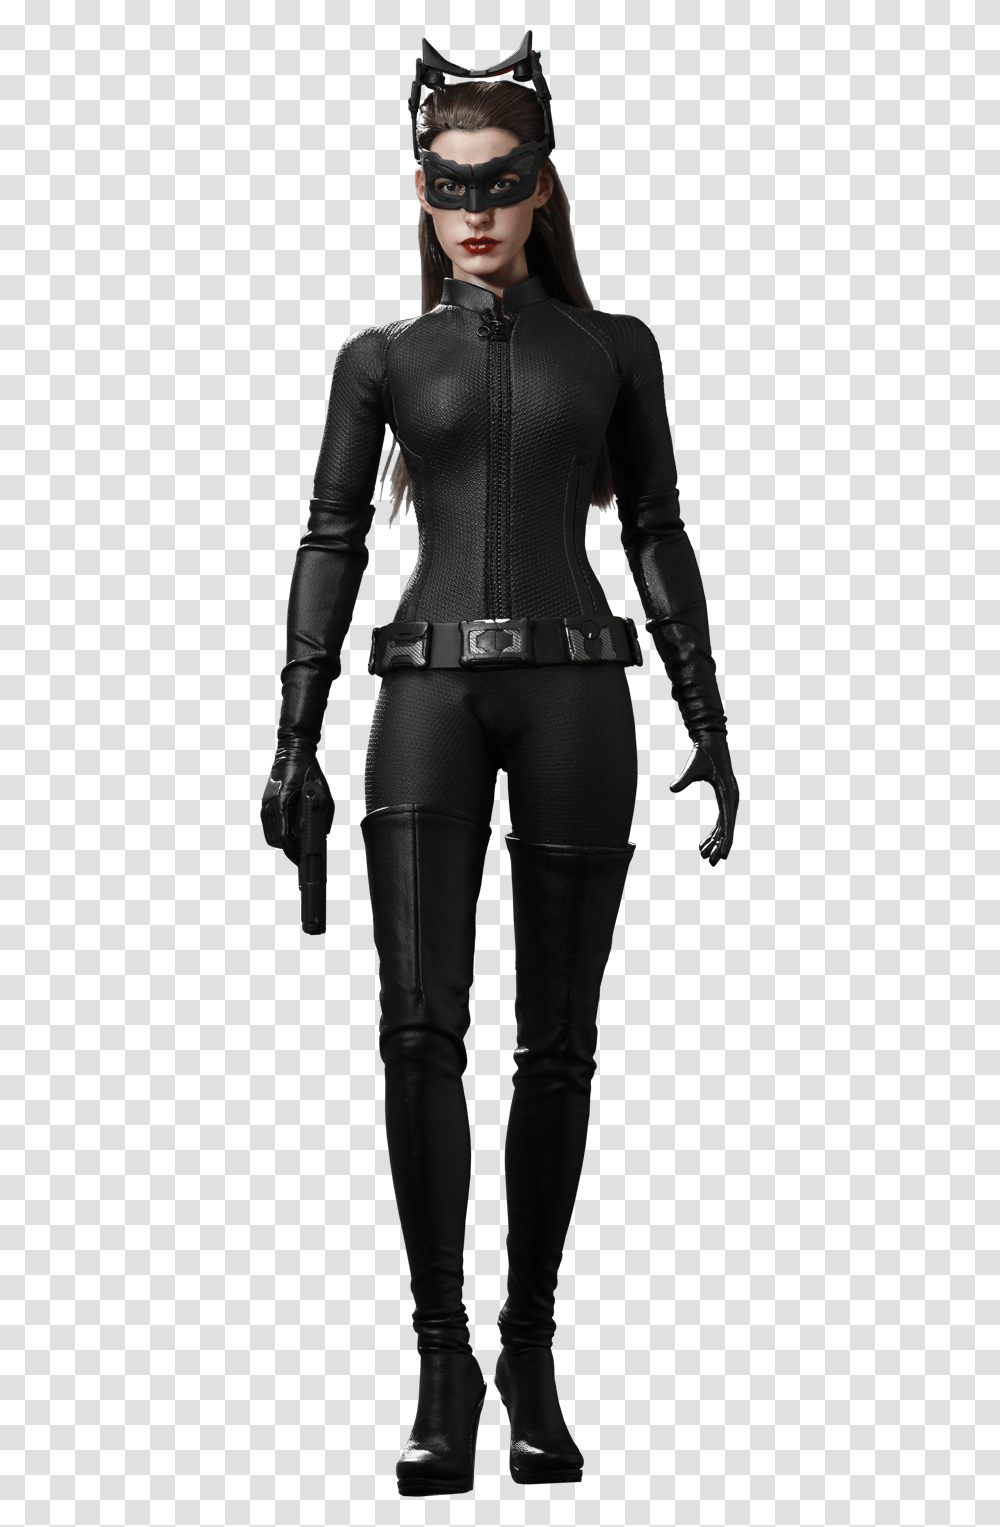 Catwoman Image Anne Hathaway Catwoman Kostm, Person, Sunglasses, Accessories Transparent Png